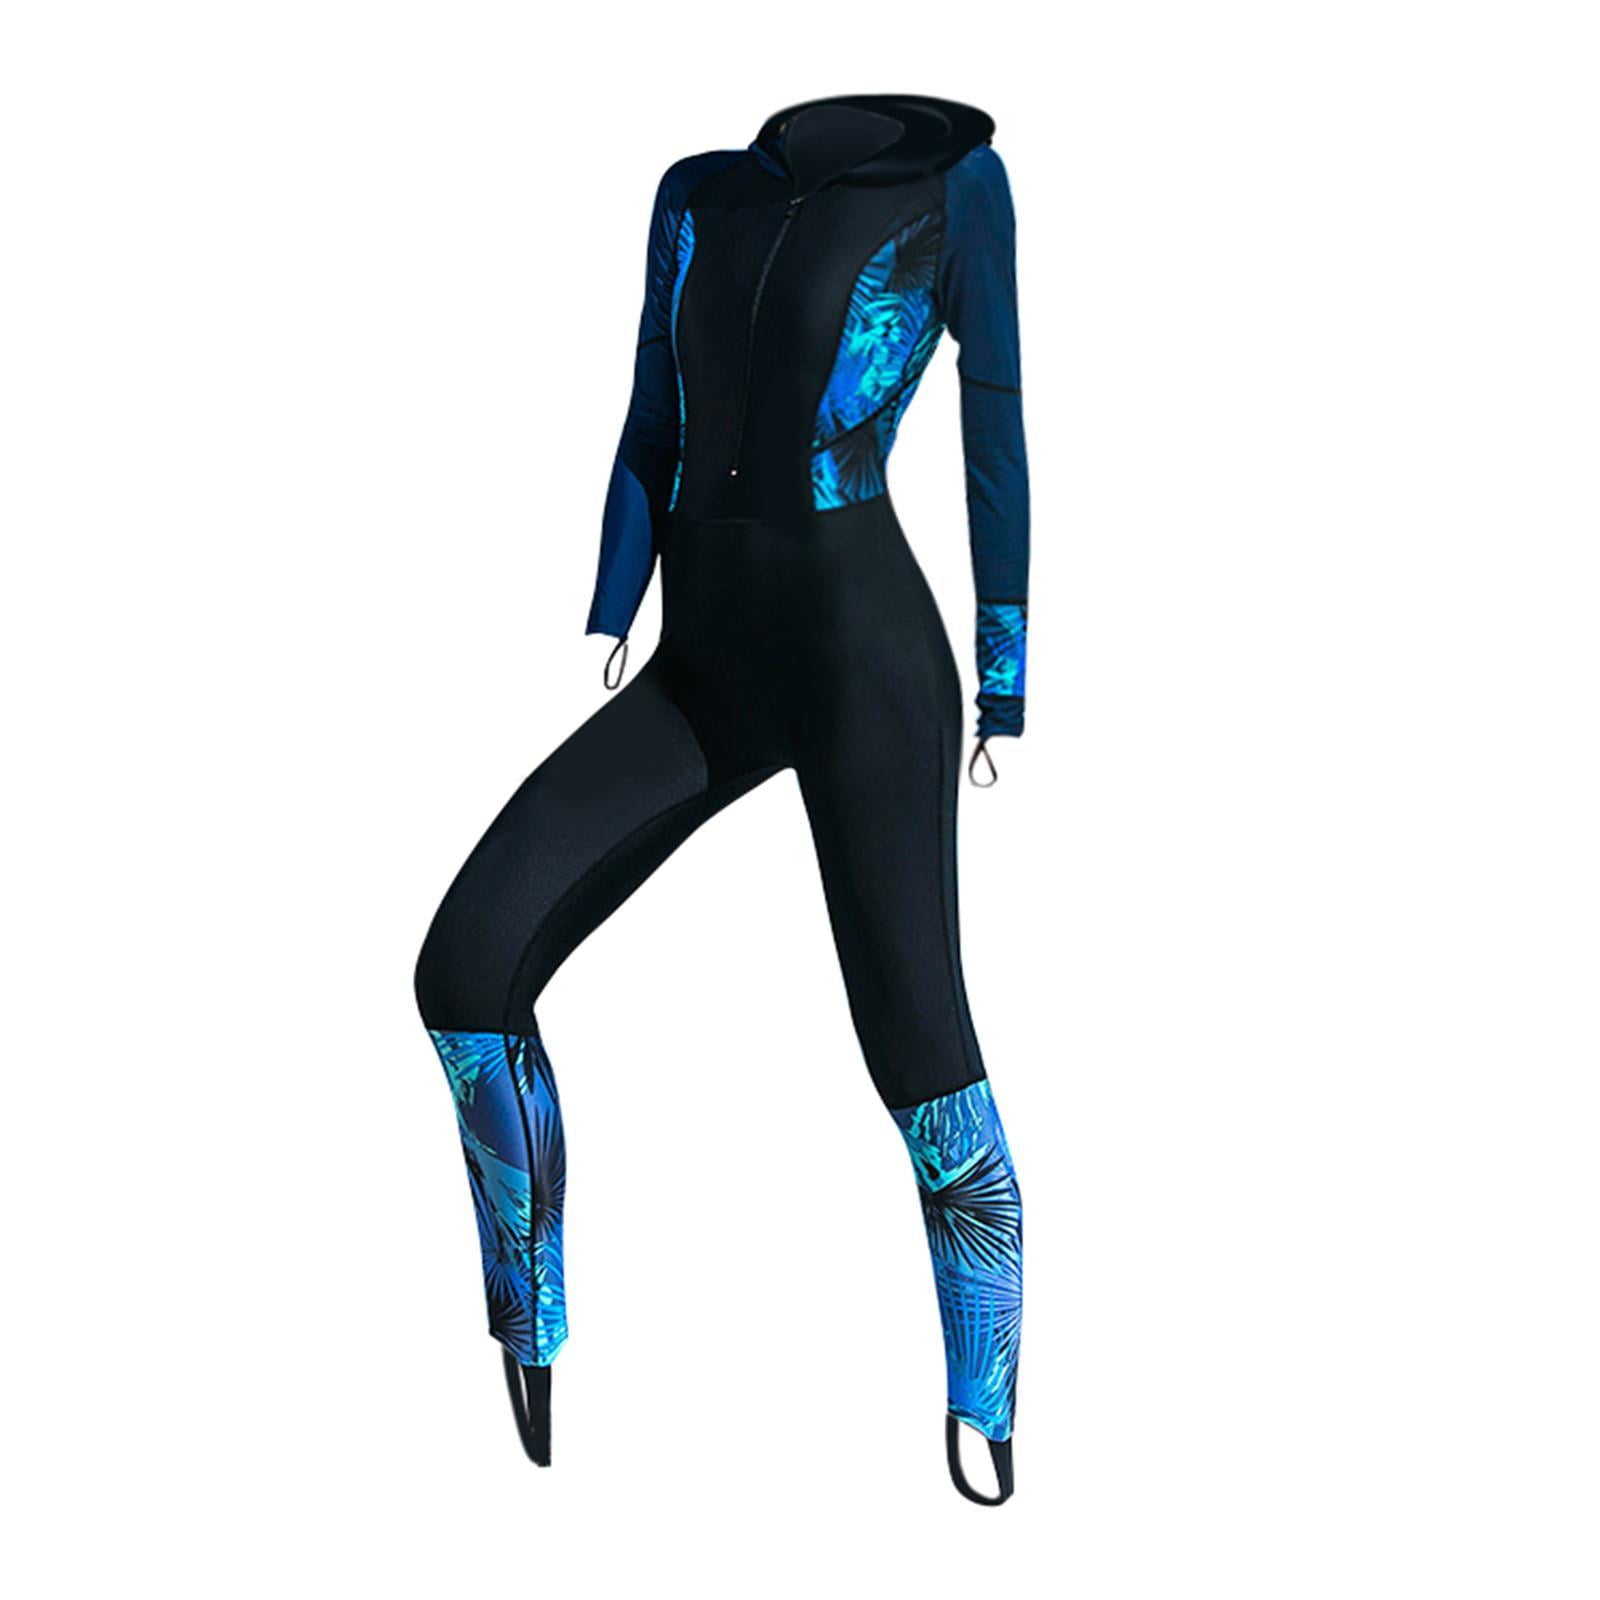 Micosuza Women Wetsuits 3mm Neoprene Sun Protection Full Body Surfing Suit Diving Snorkeling Swimming Thermal Jumpsuit 